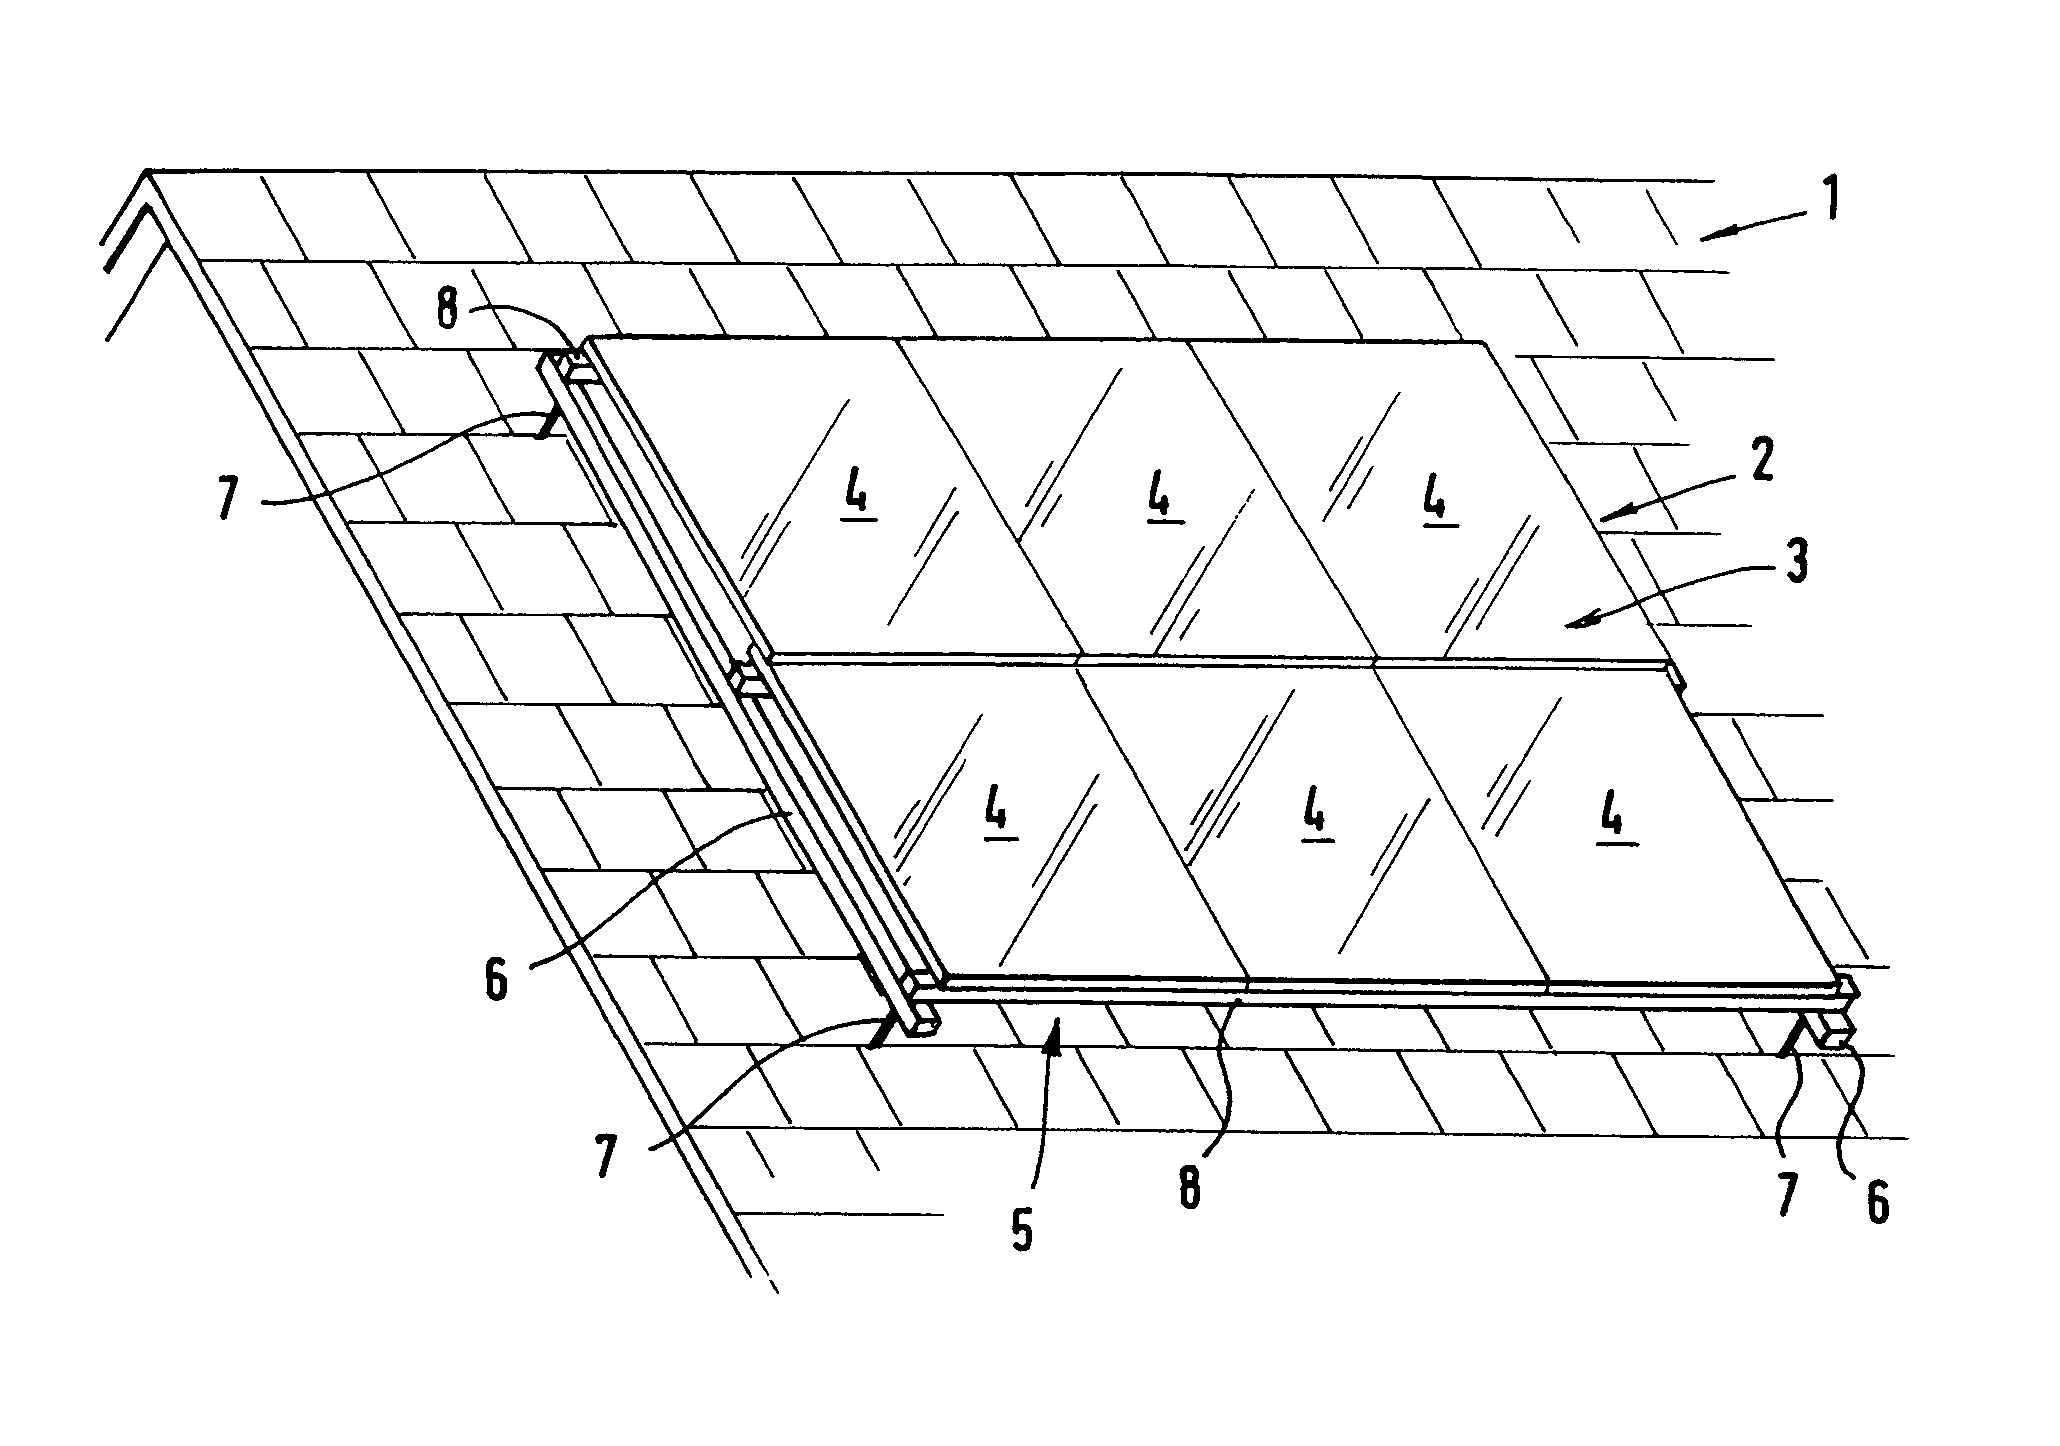 Fastening device for flat components, especially solar modules, to be arranged on a framework